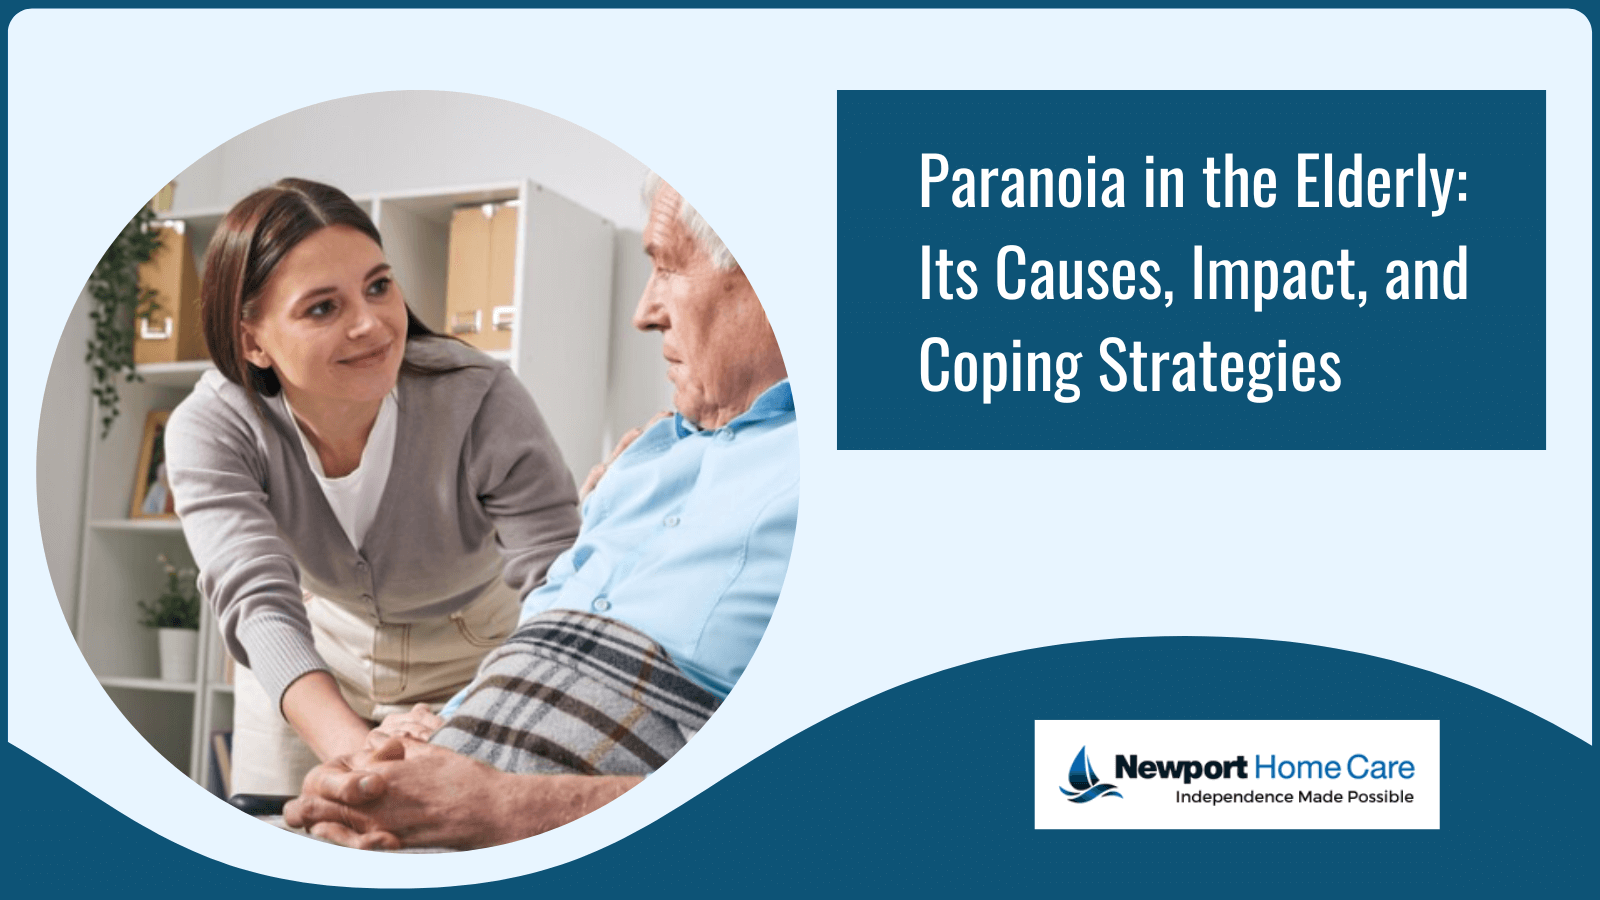 Paranoia in the Elderly: Its Causes, Impact, and Coping Strategies